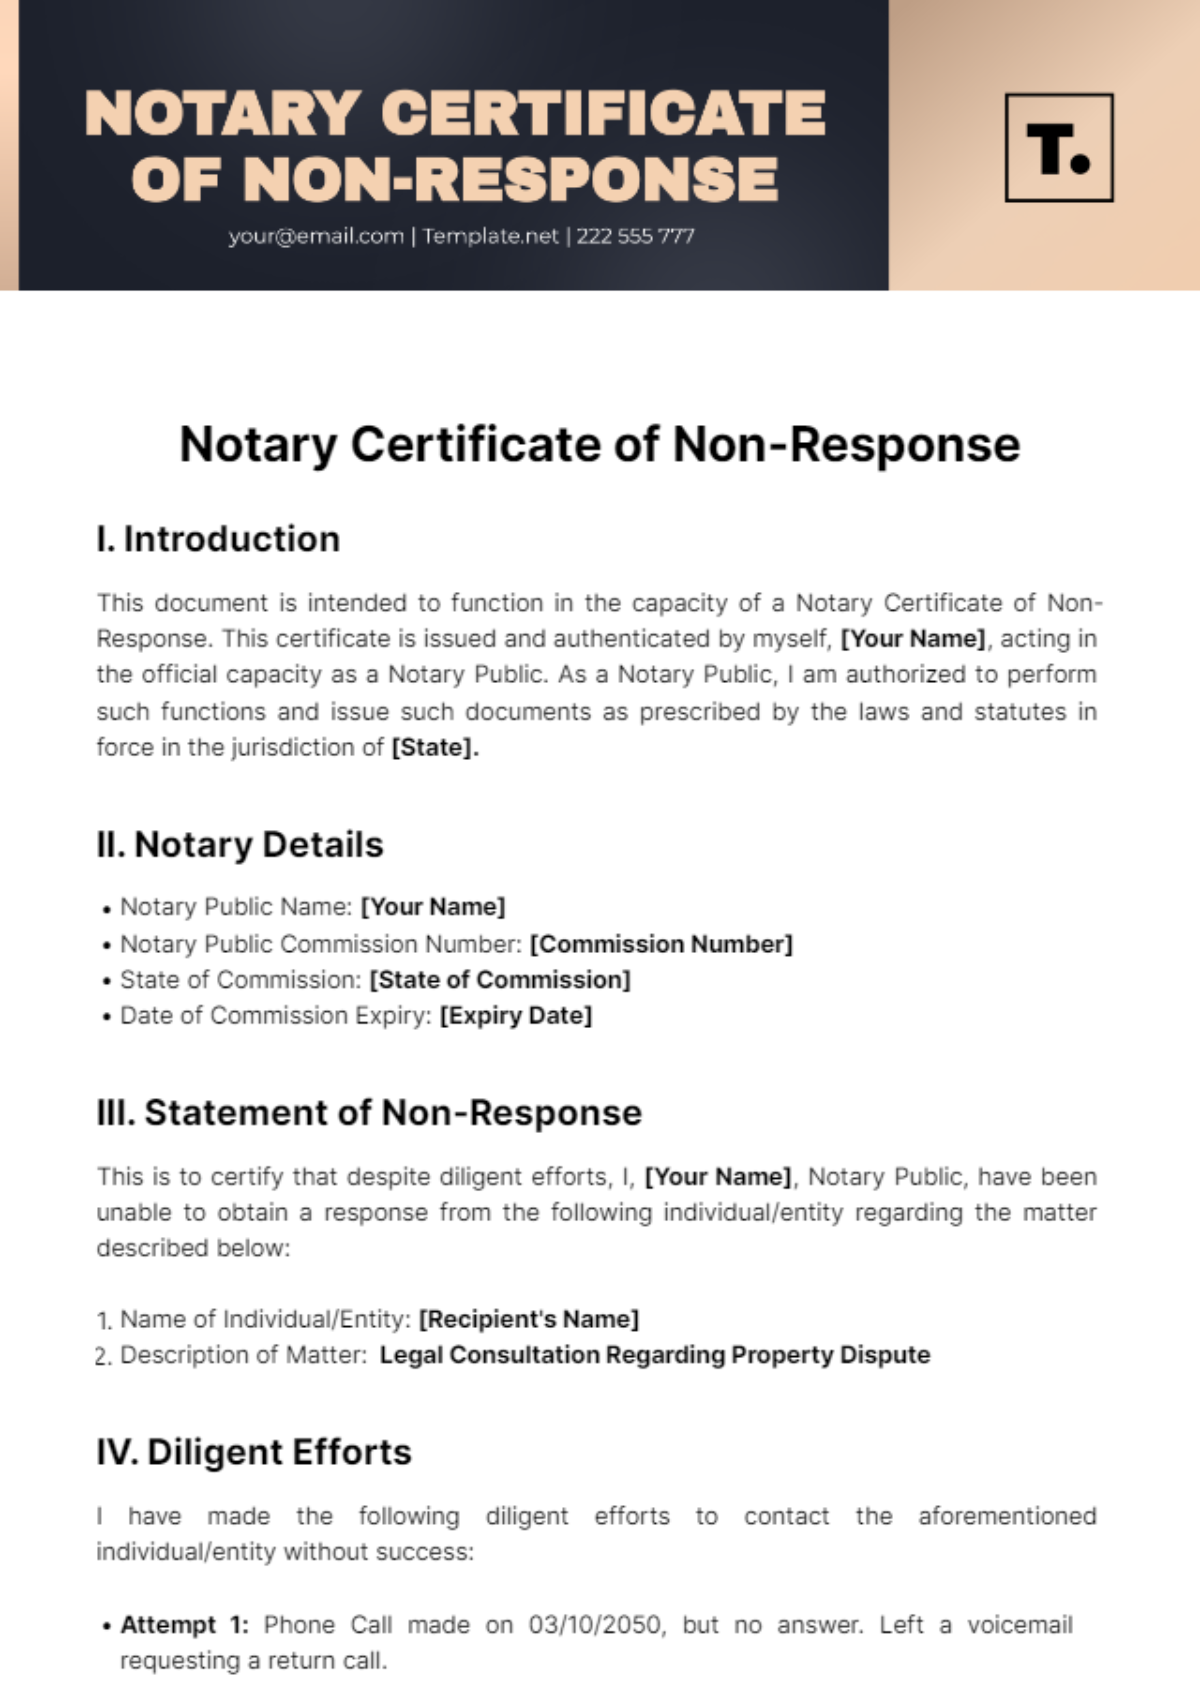 Notary Certificate Of Non-Response Template